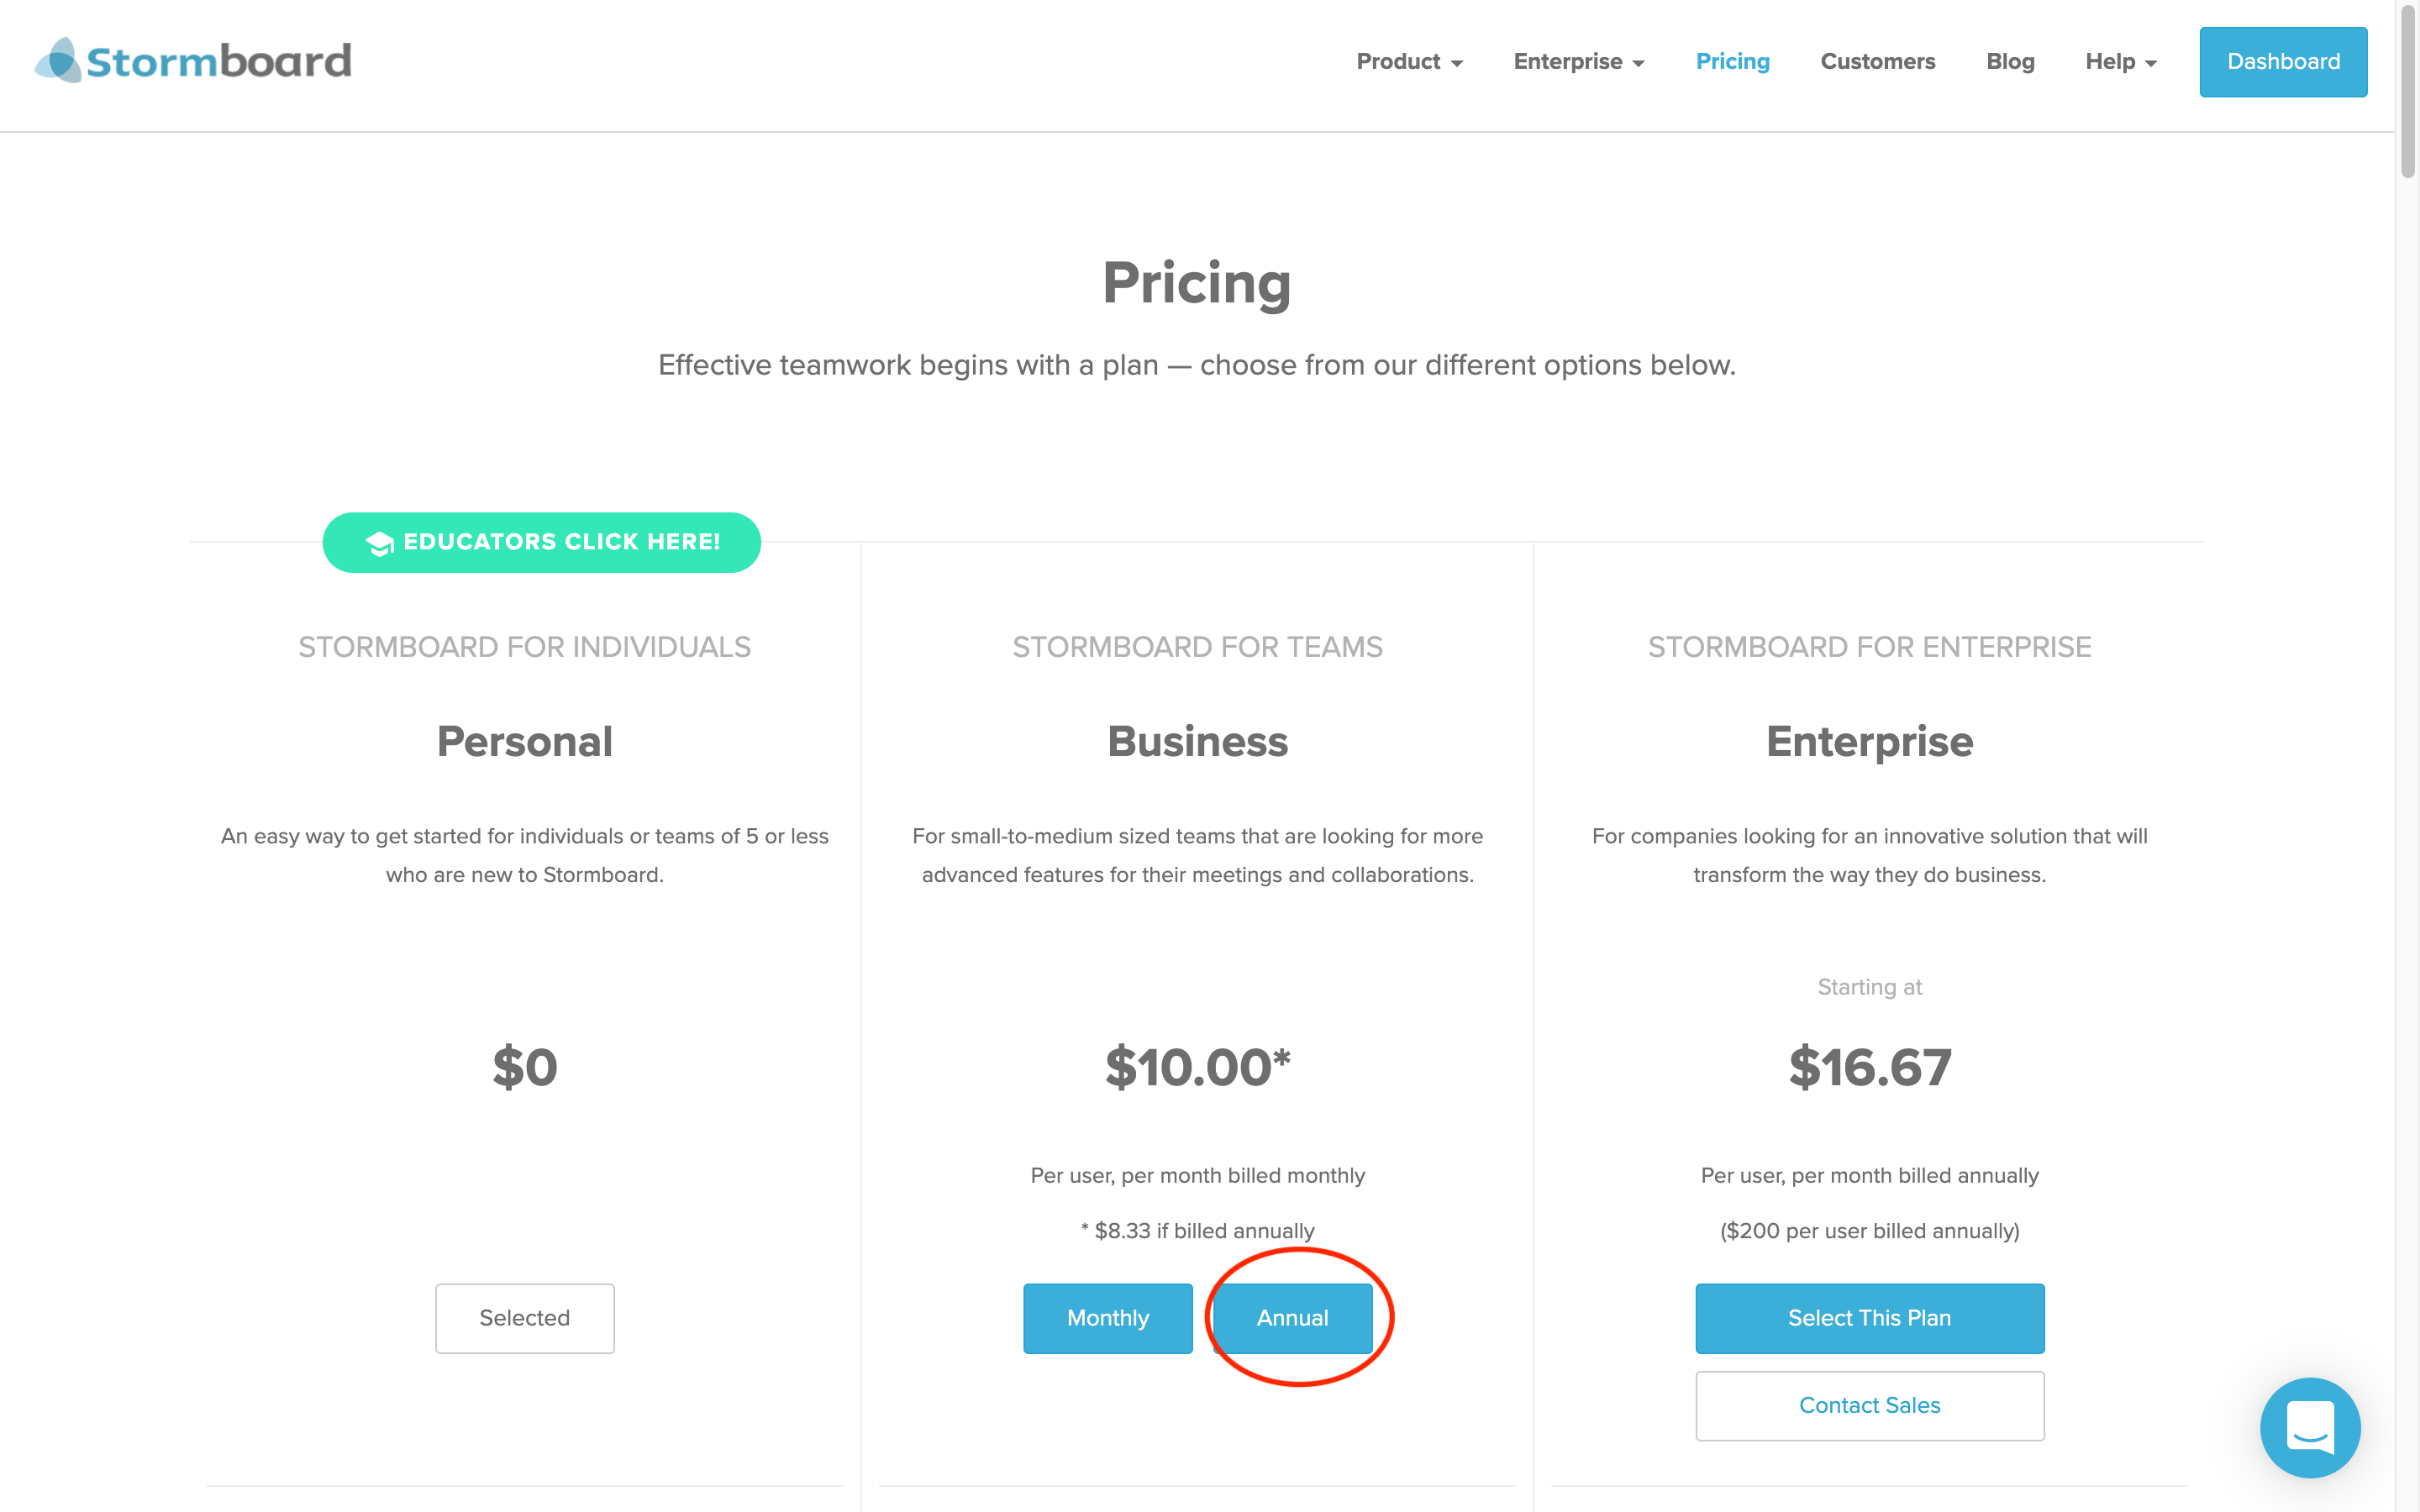 Highlighting Stormboard's Annual option on the pricing page